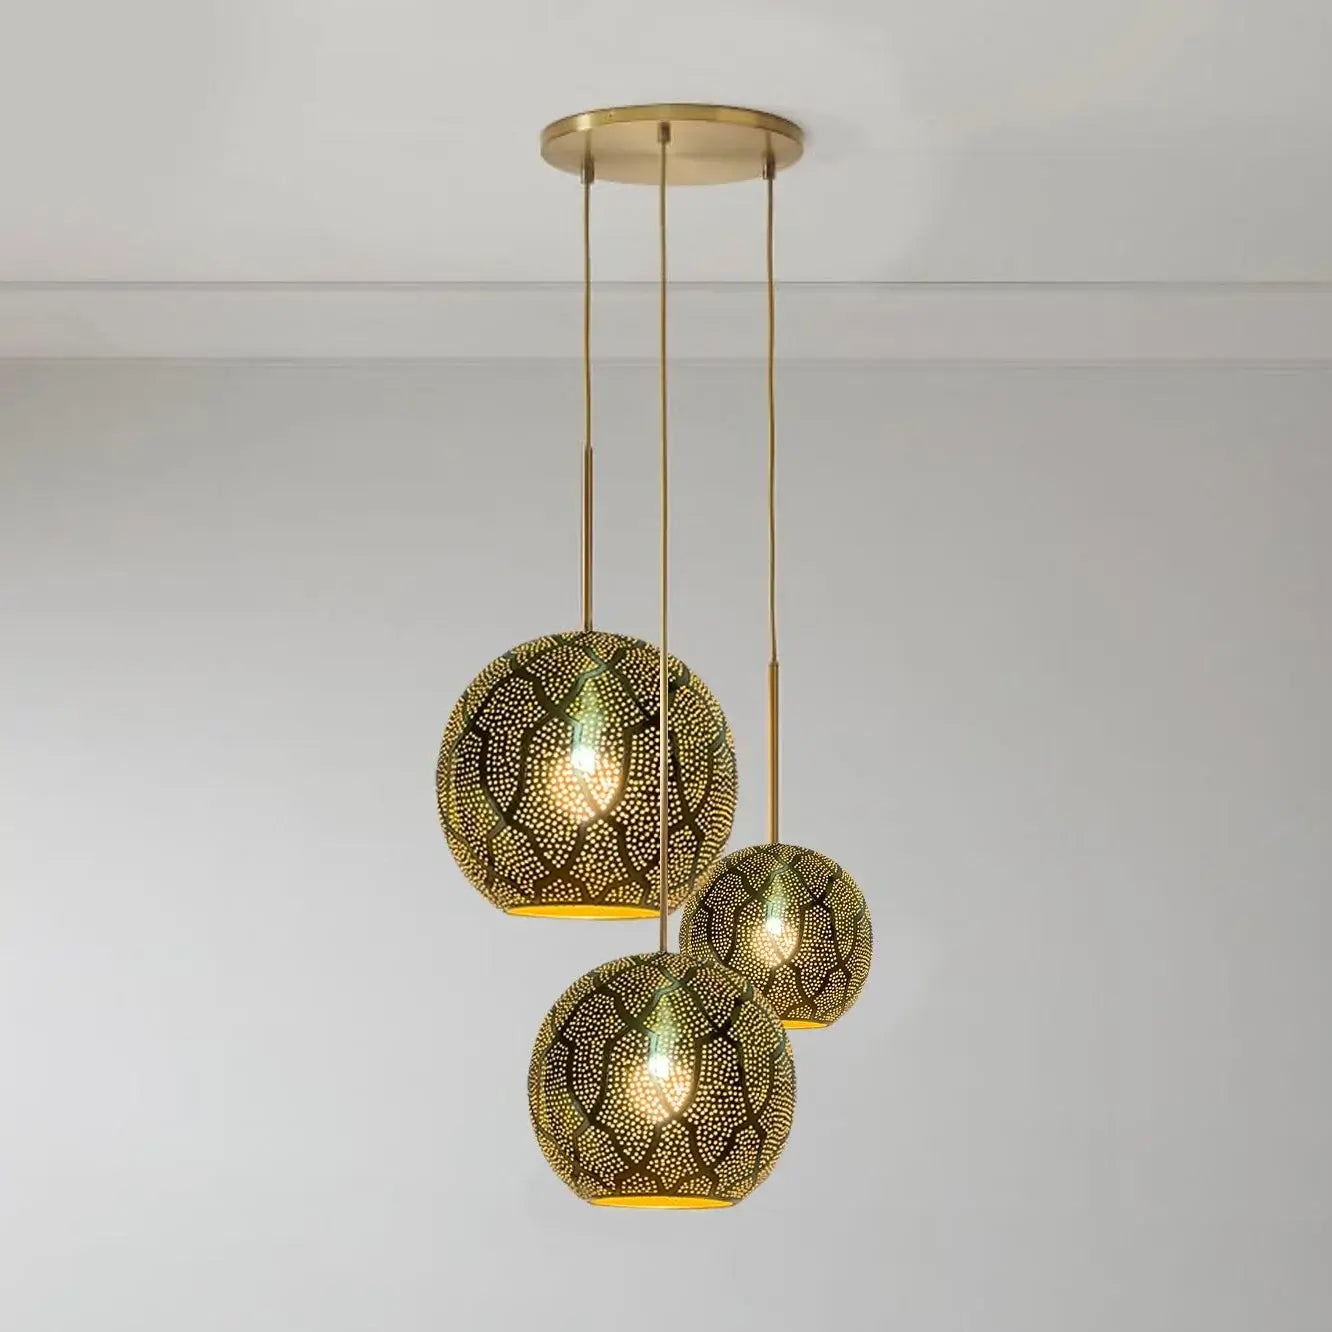 Dounia home Chandelier in polished brass  made of Metal, Model: Ari